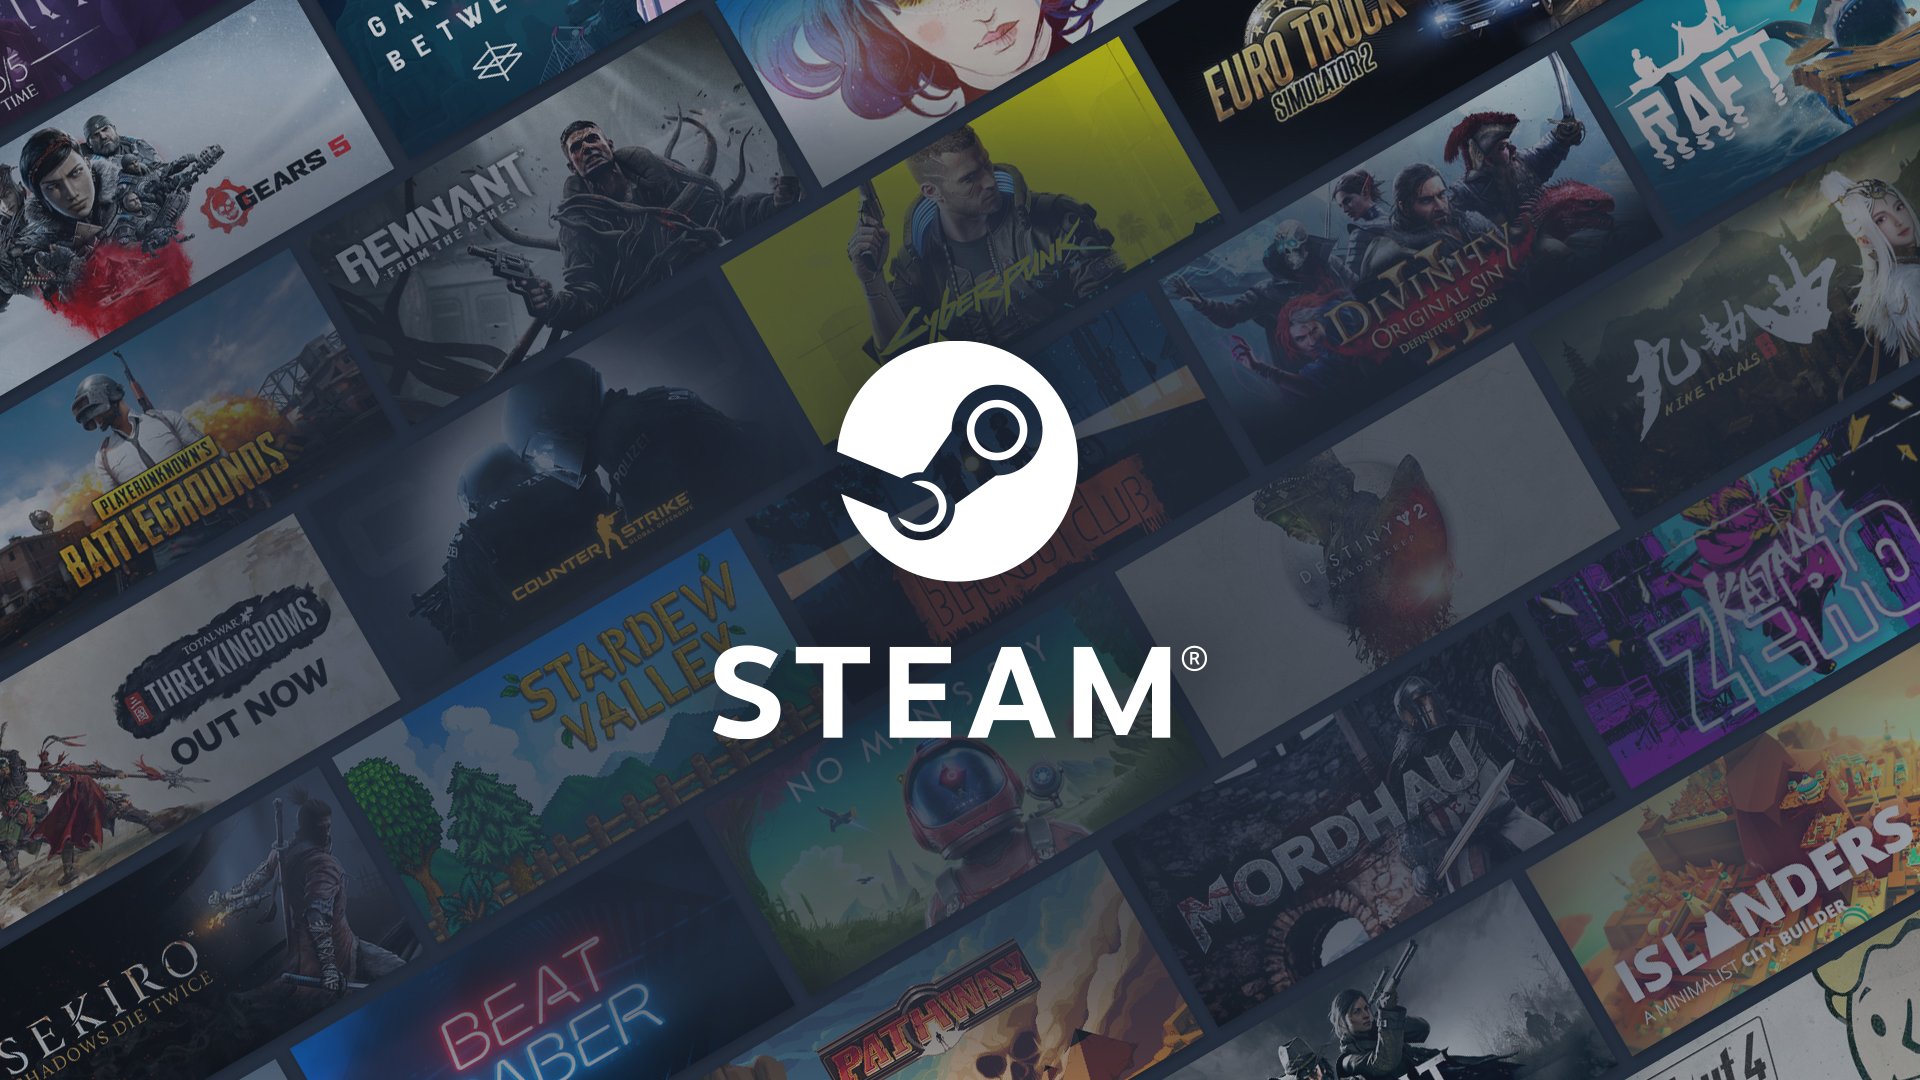 The Steam Summer Sale 2021 is live, with discounts and an adventure minigame